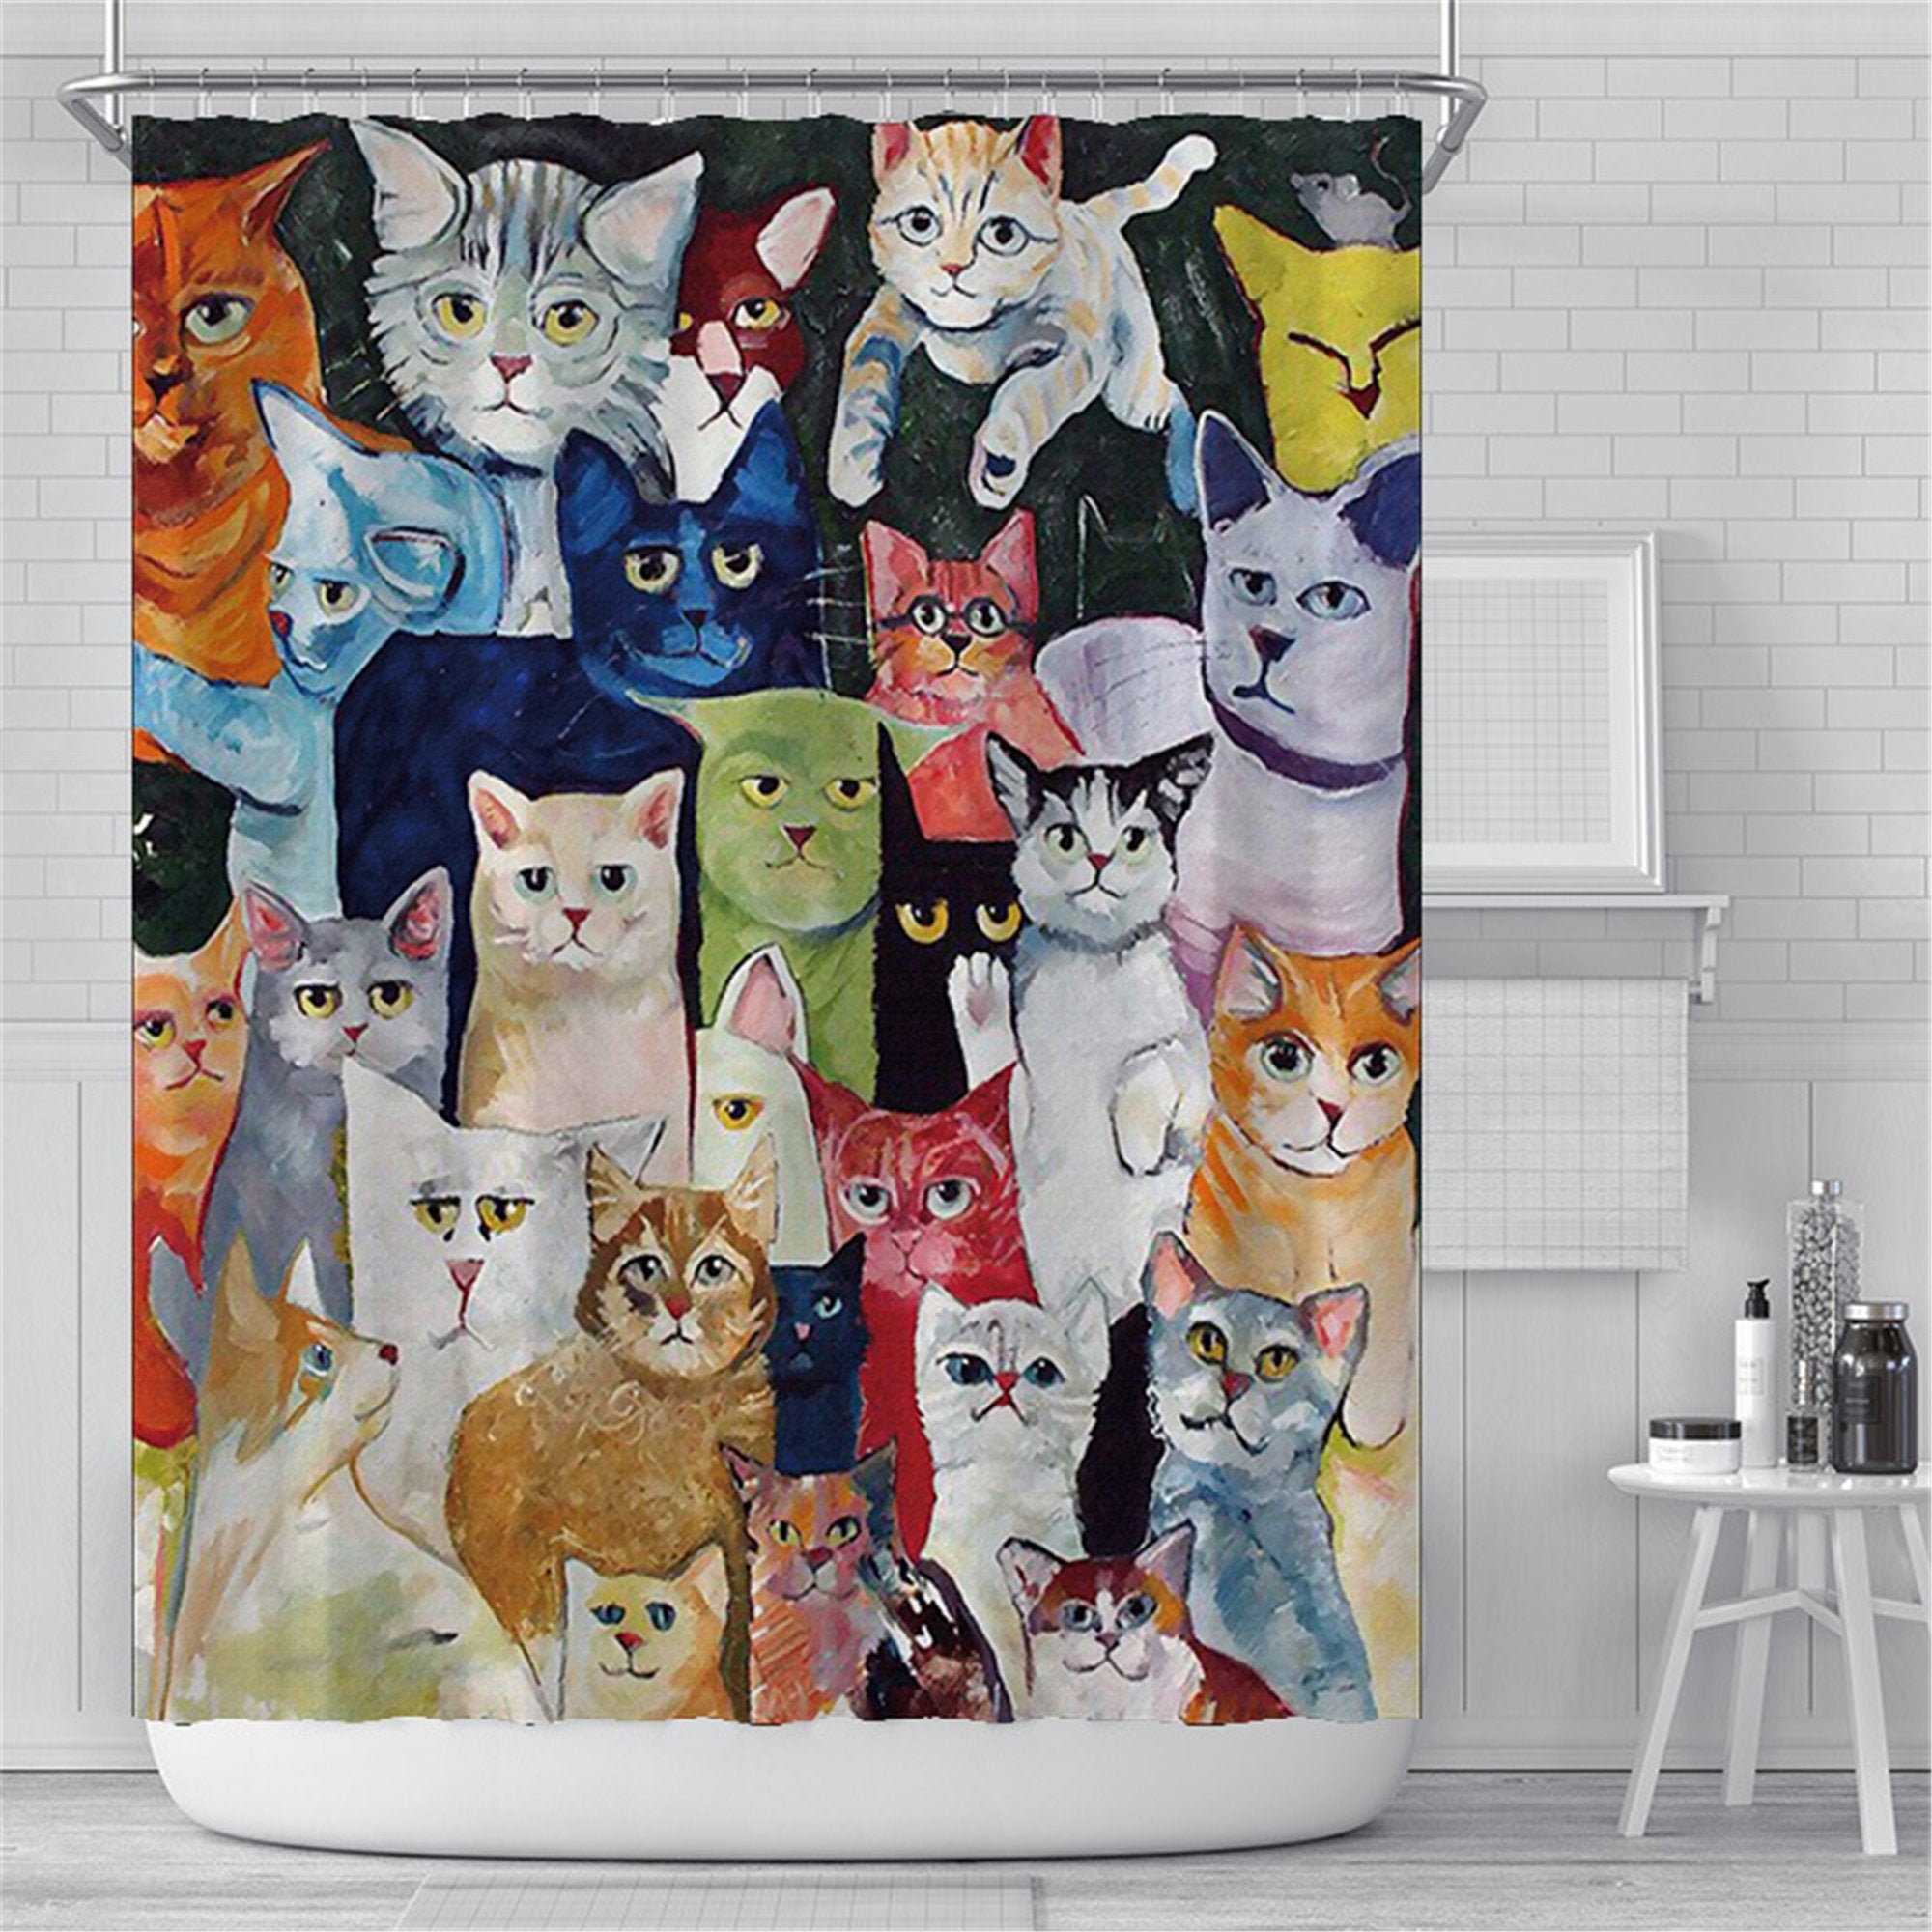 Various Colorful Cats Shower Curtain. Waterproof shower | Etsy